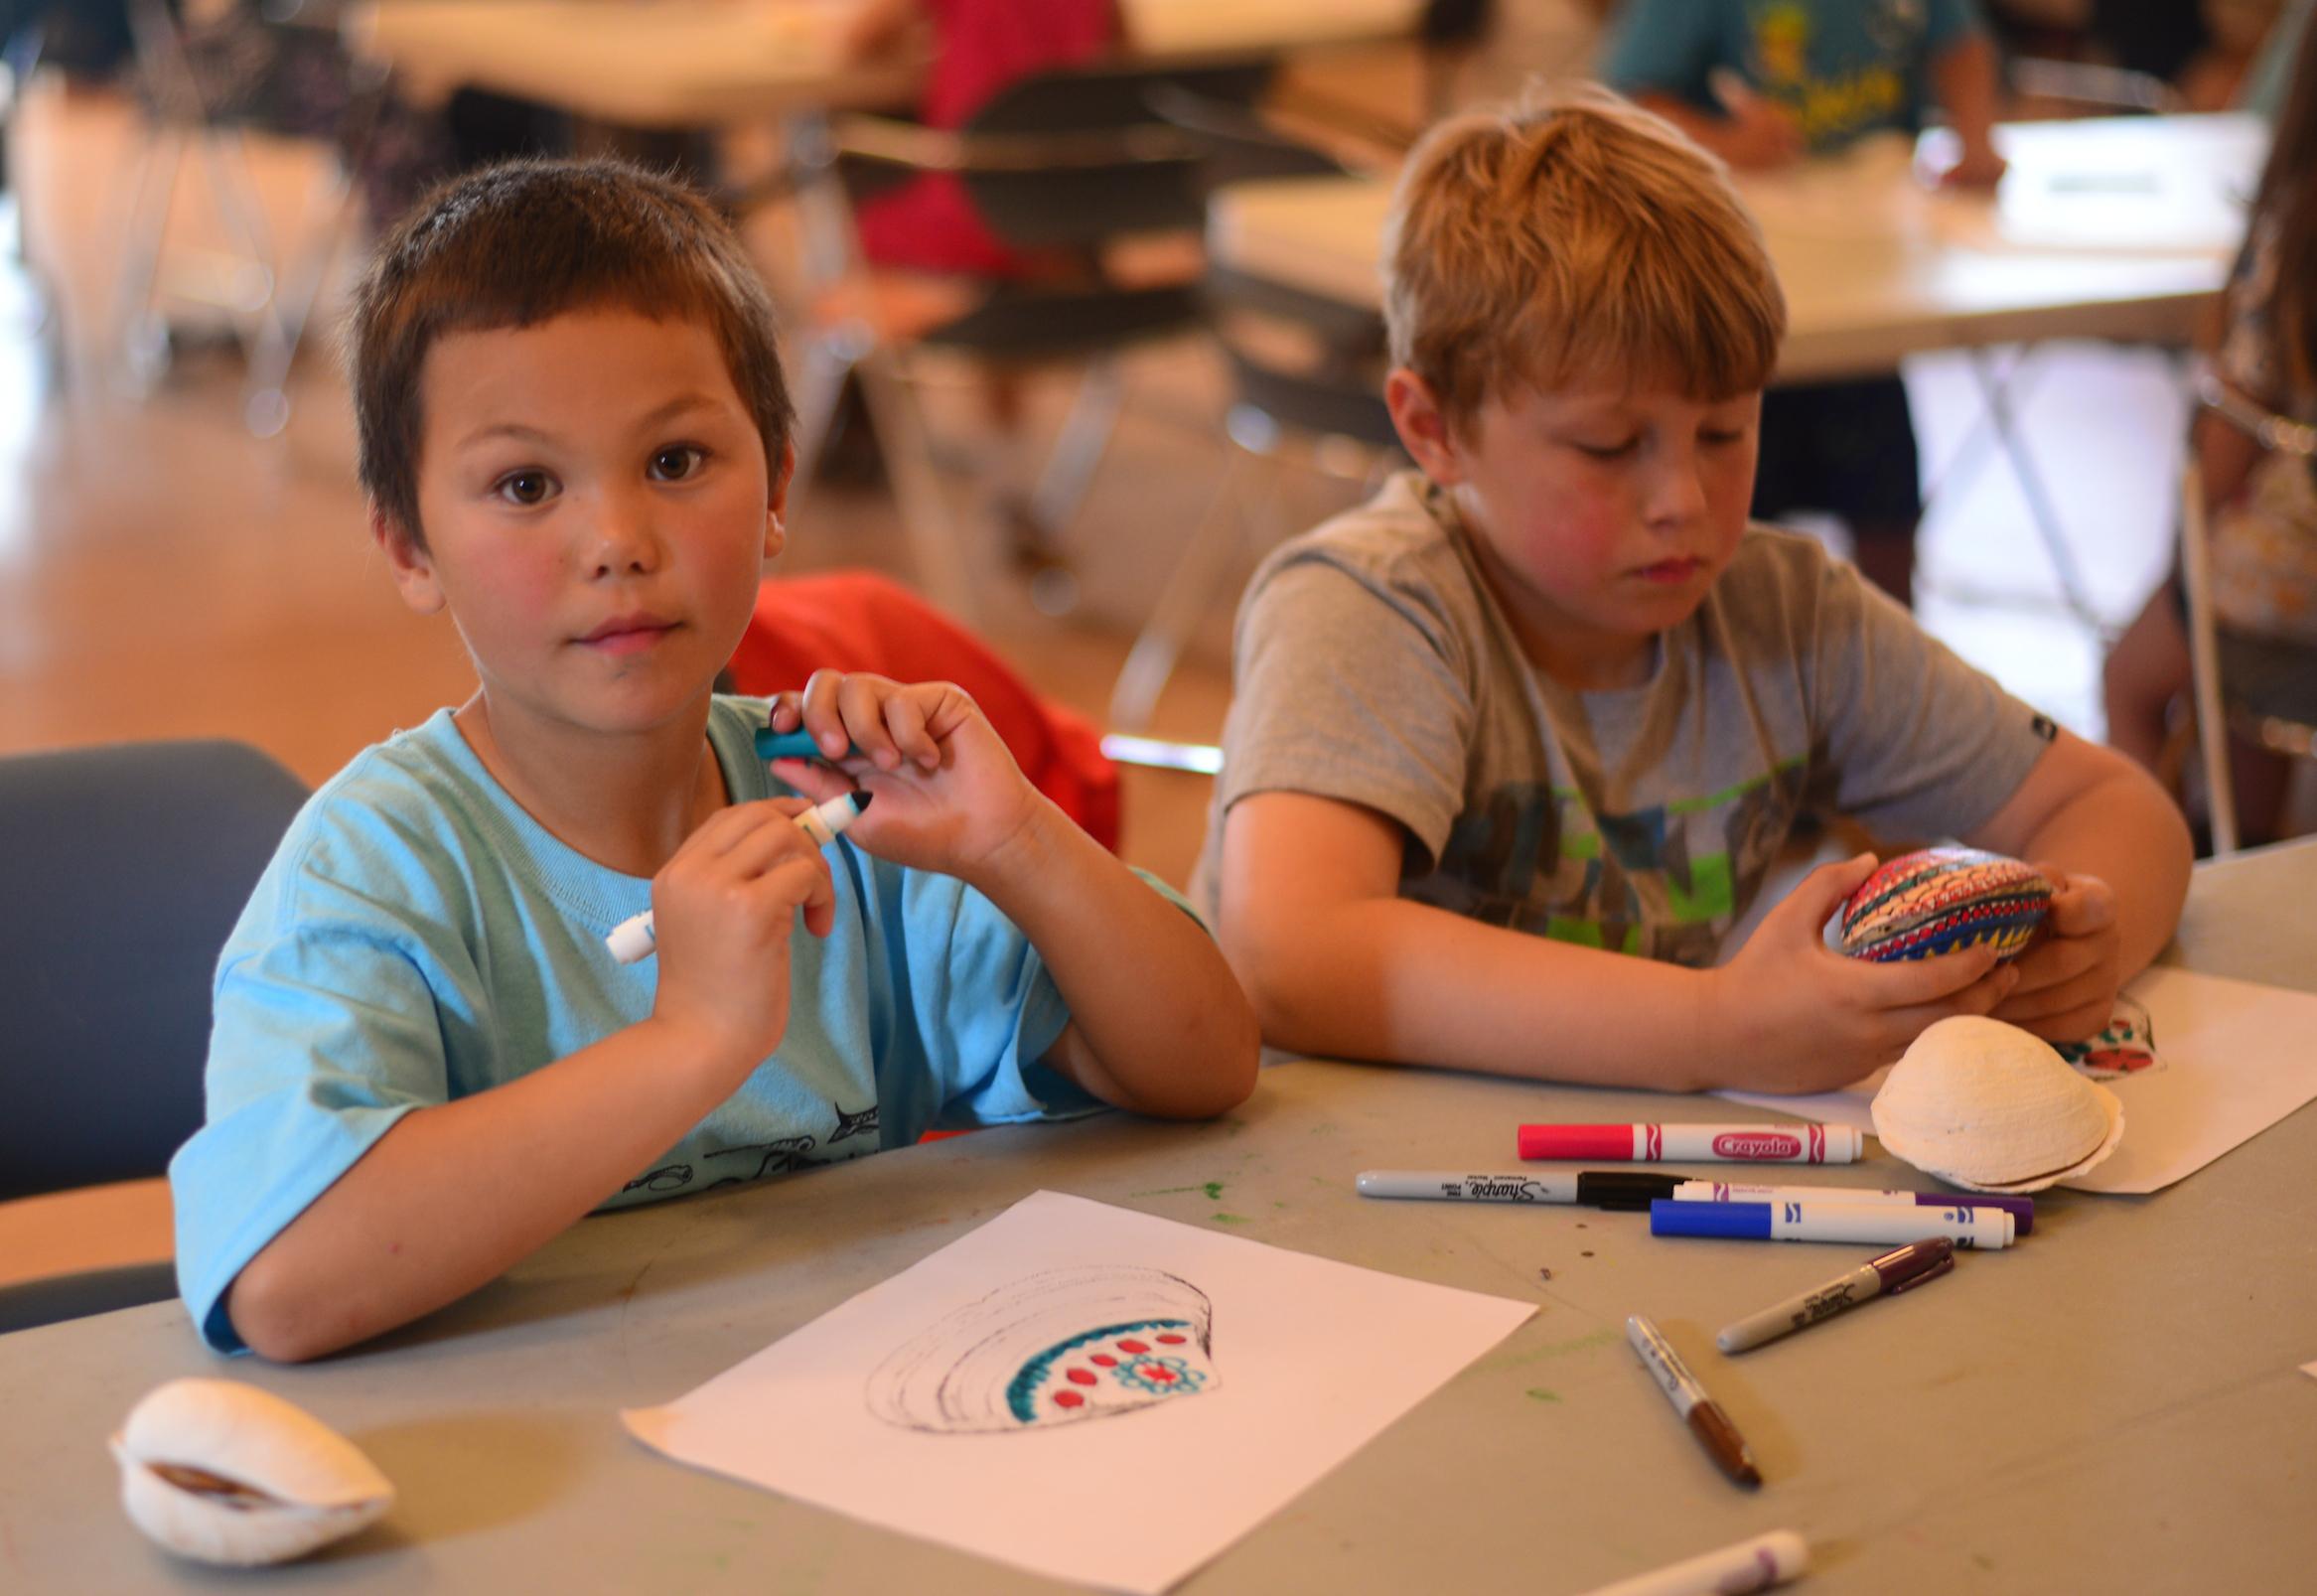 Campers draw draft clam rattle designs. (Photo by Berett Wilber/KUCB)